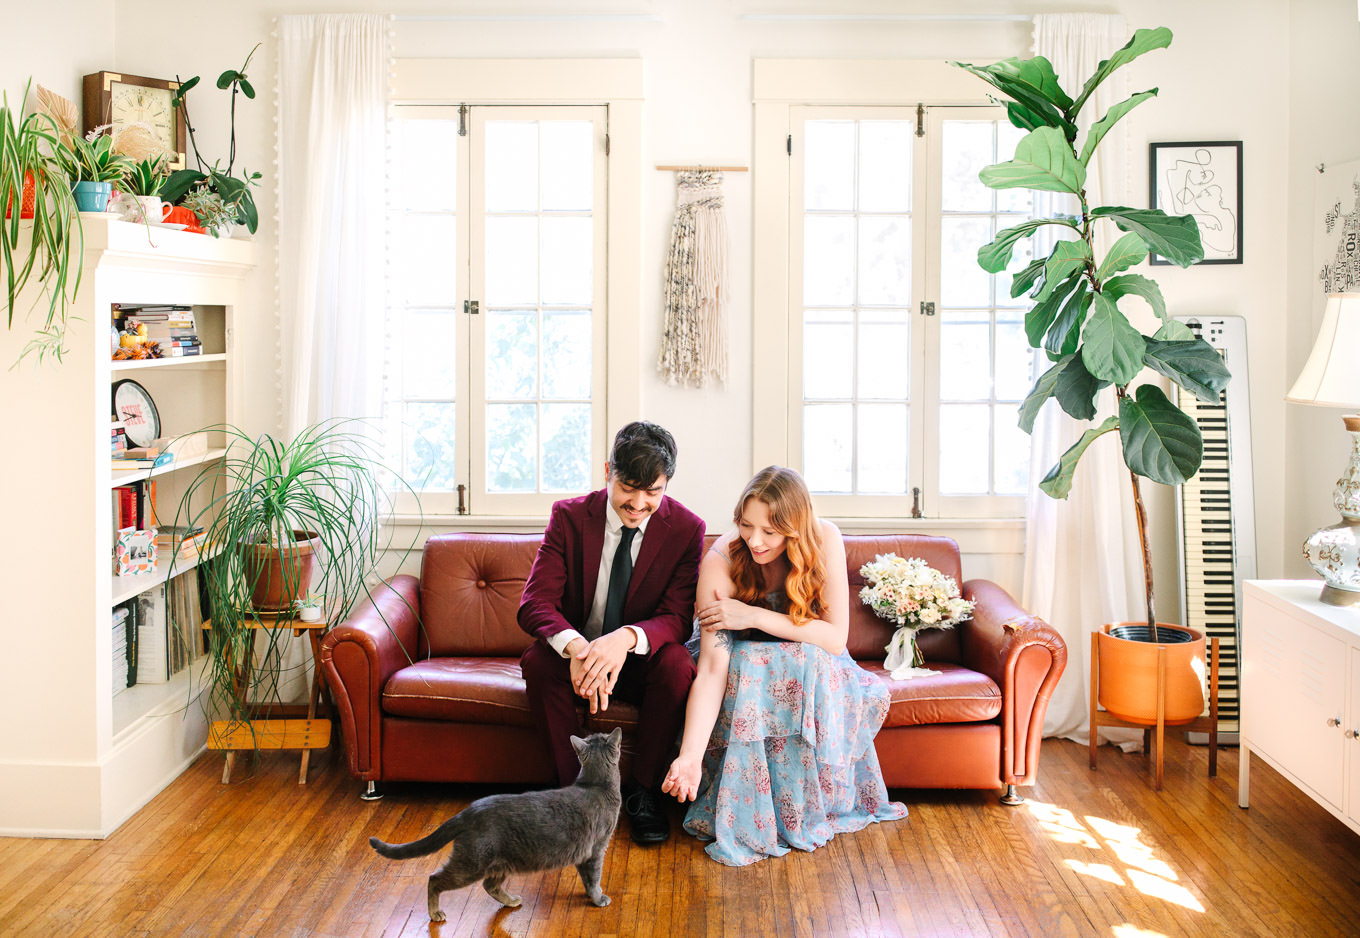 Couple in boho Los Angeles living room on a couch with their cat | Los Angeles Arboretum Elopement | Colorful and elevated wedding photography for fun-loving couples in Southern California | #LosAngelesElopement #elopement #LAarboretum #LAskyline #elopementphotos   Source: Mary Costa Photography | Los Angeles 